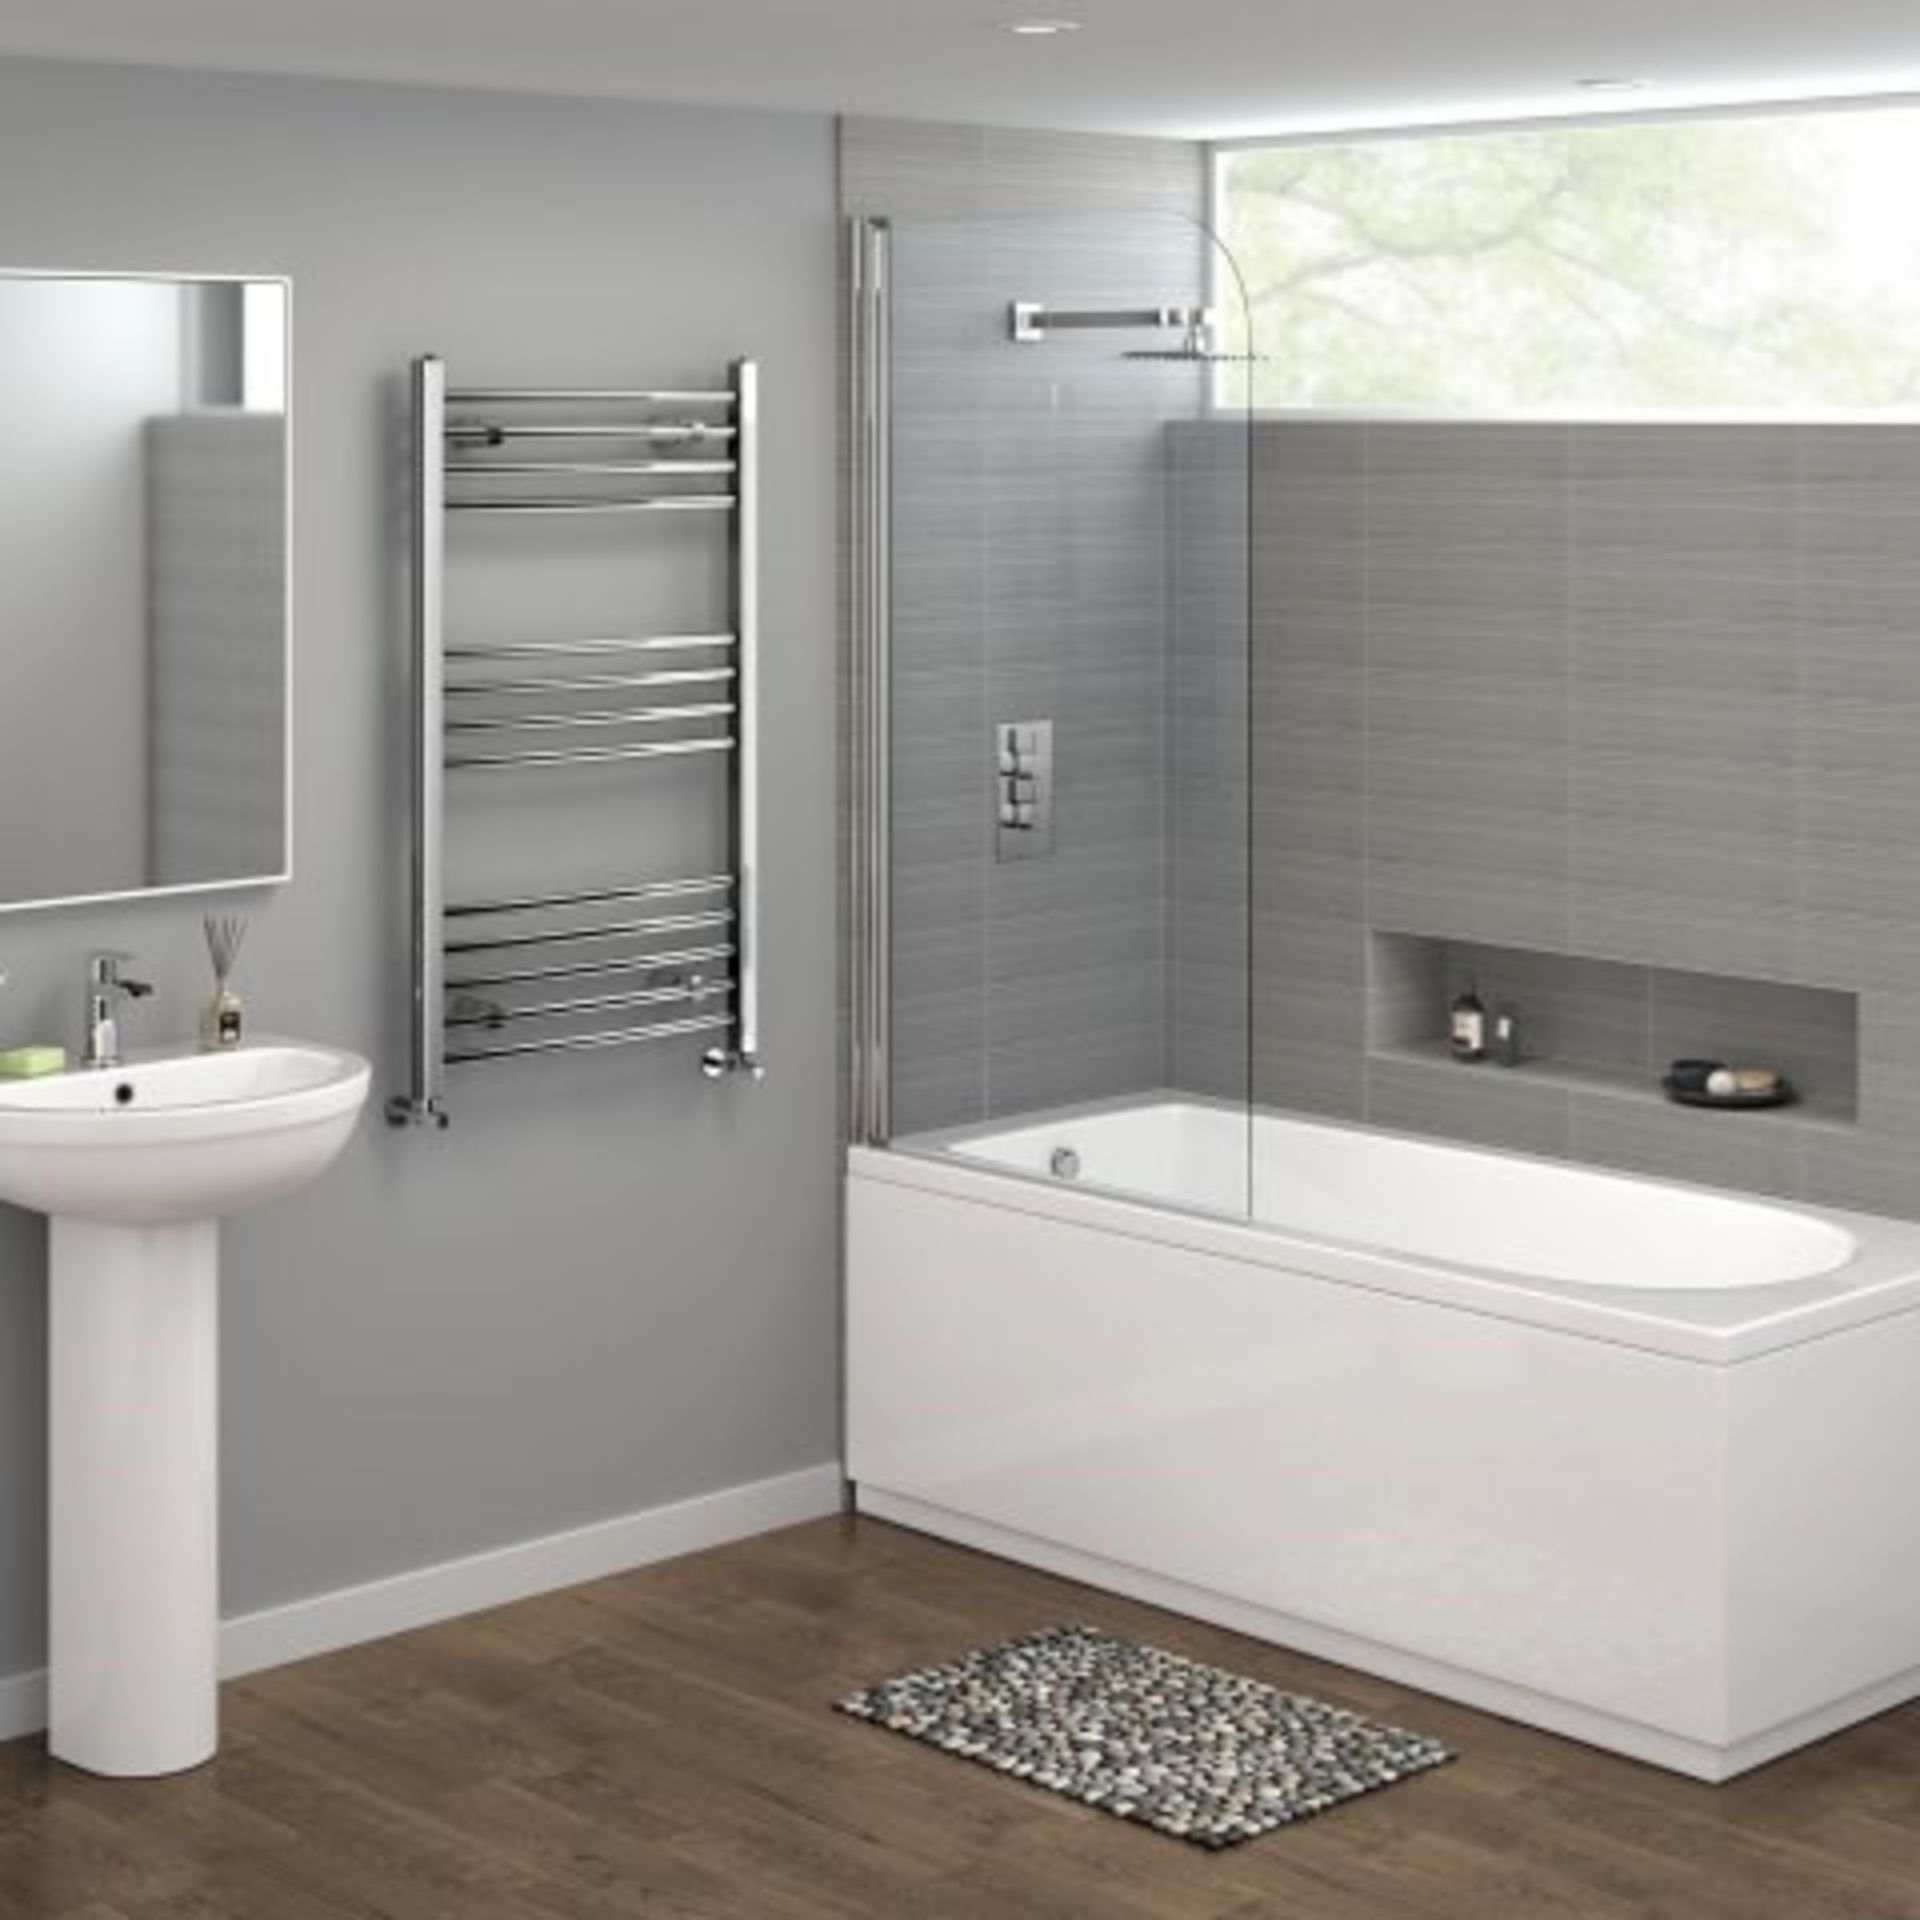 1200x600mm - 20mm Tubes - RRP £219.99 each.Chrome Curved Rail Ladder Towel Radiator. Our Nanc... - Image 2 of 2